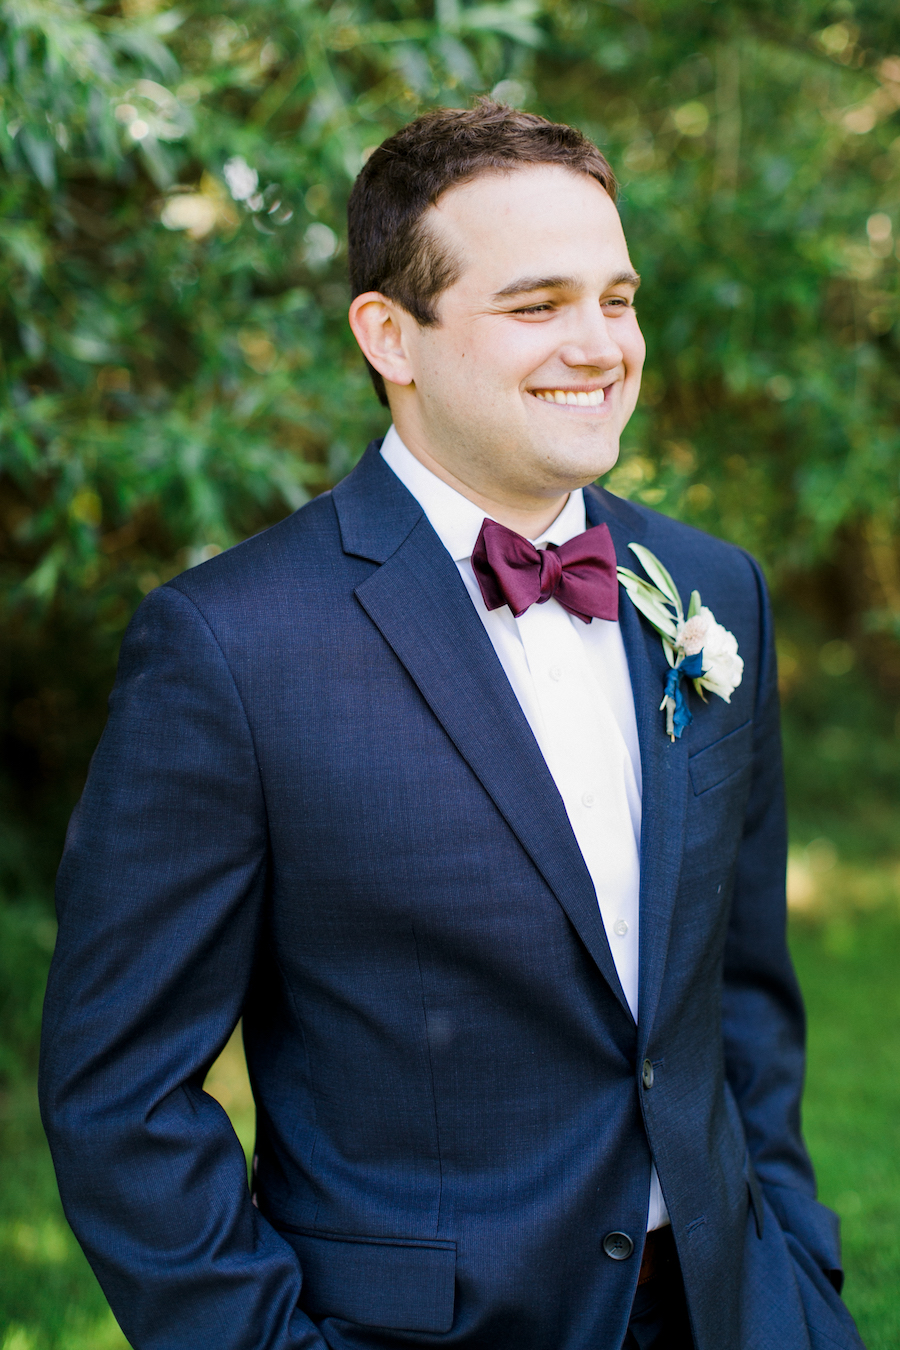 A groom smiling on his wedding day